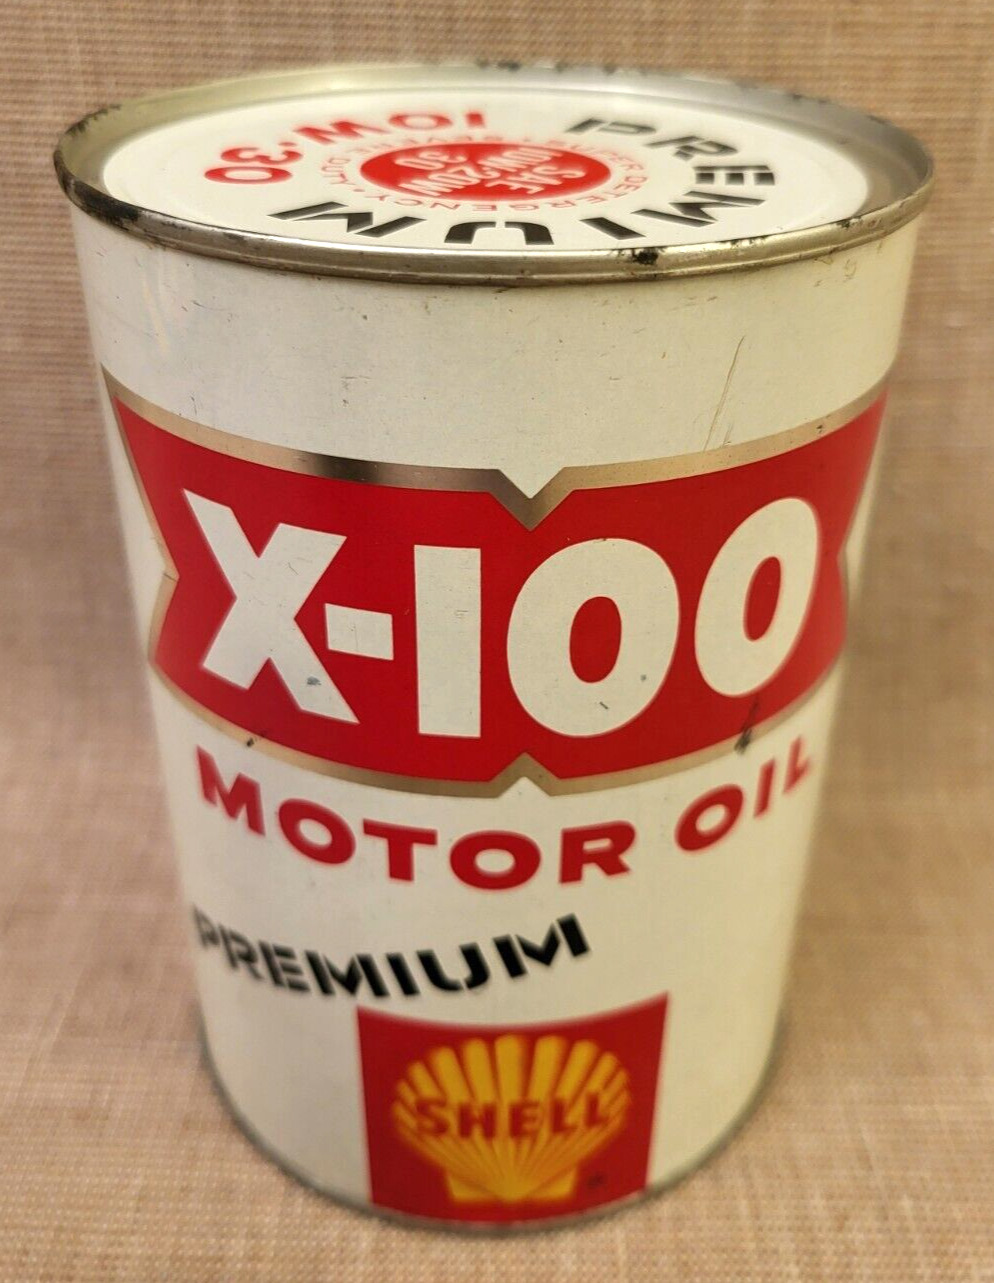 Vintage Shell X-100 Premium 10W30 Motor Oil Steel-Sided Sealed 1-Qt. Can - Nice